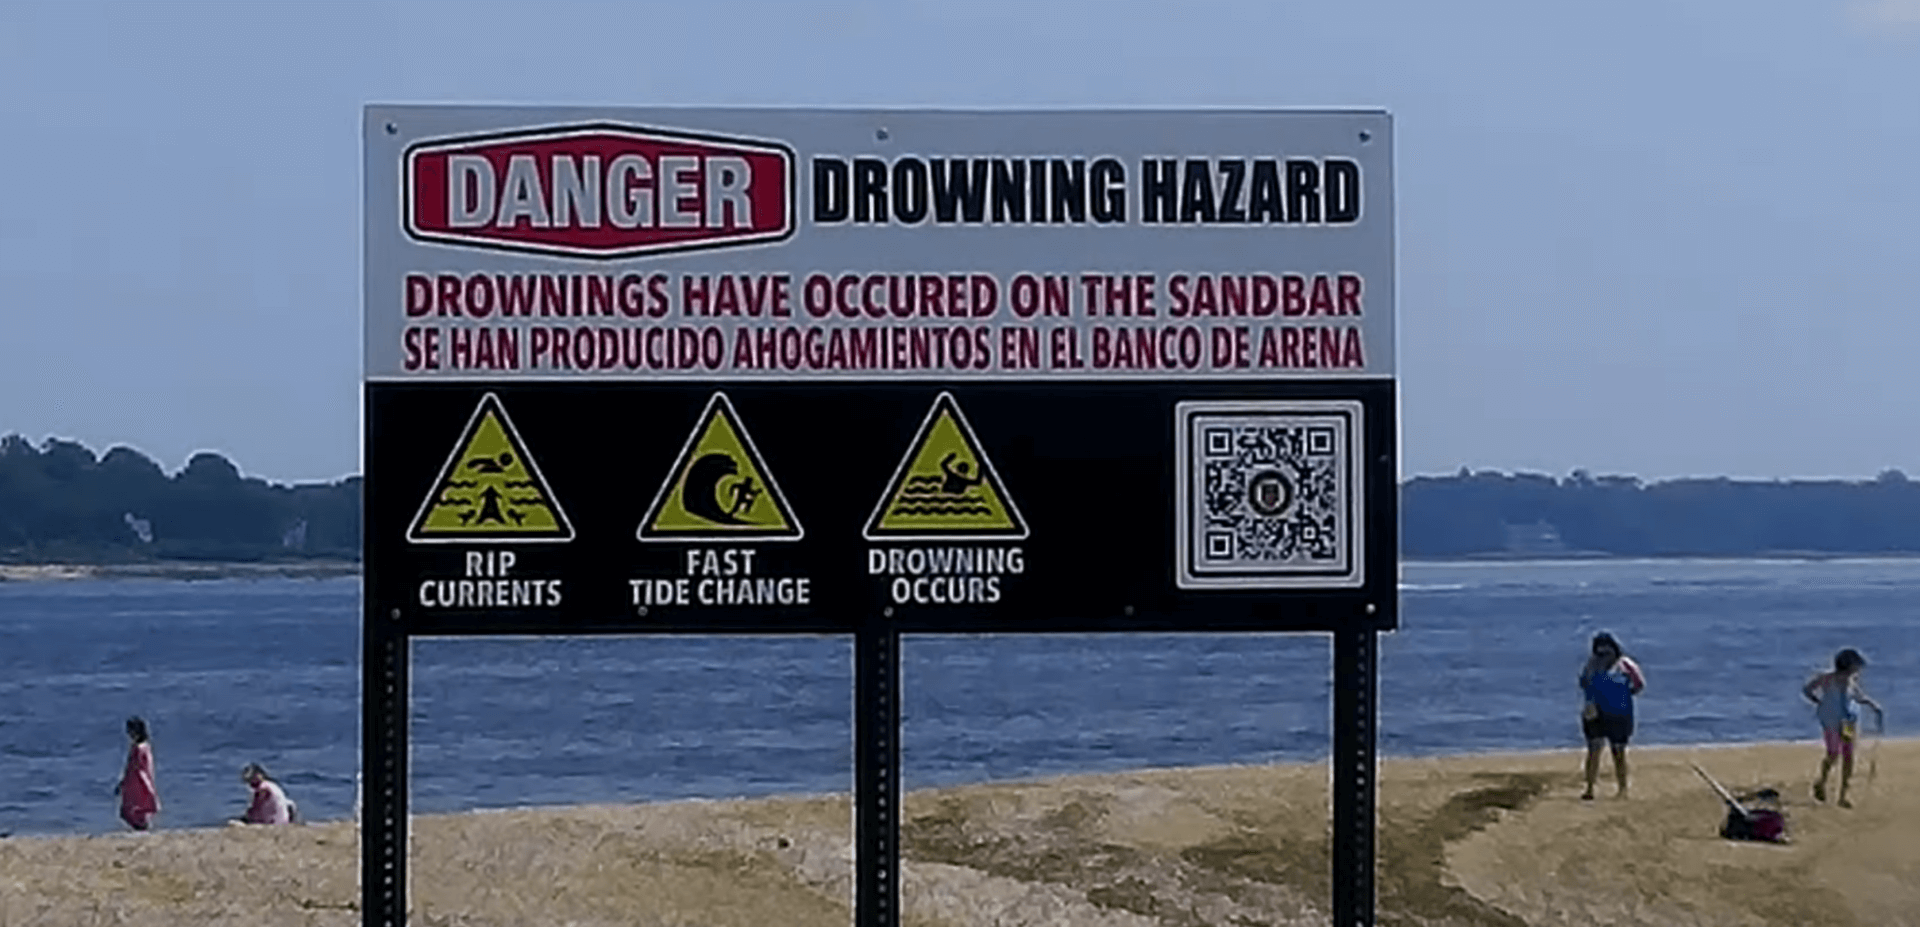 [CREDIT: City of Warwick] Warwick has installed signs warning the public about Conimicut Point drownings.